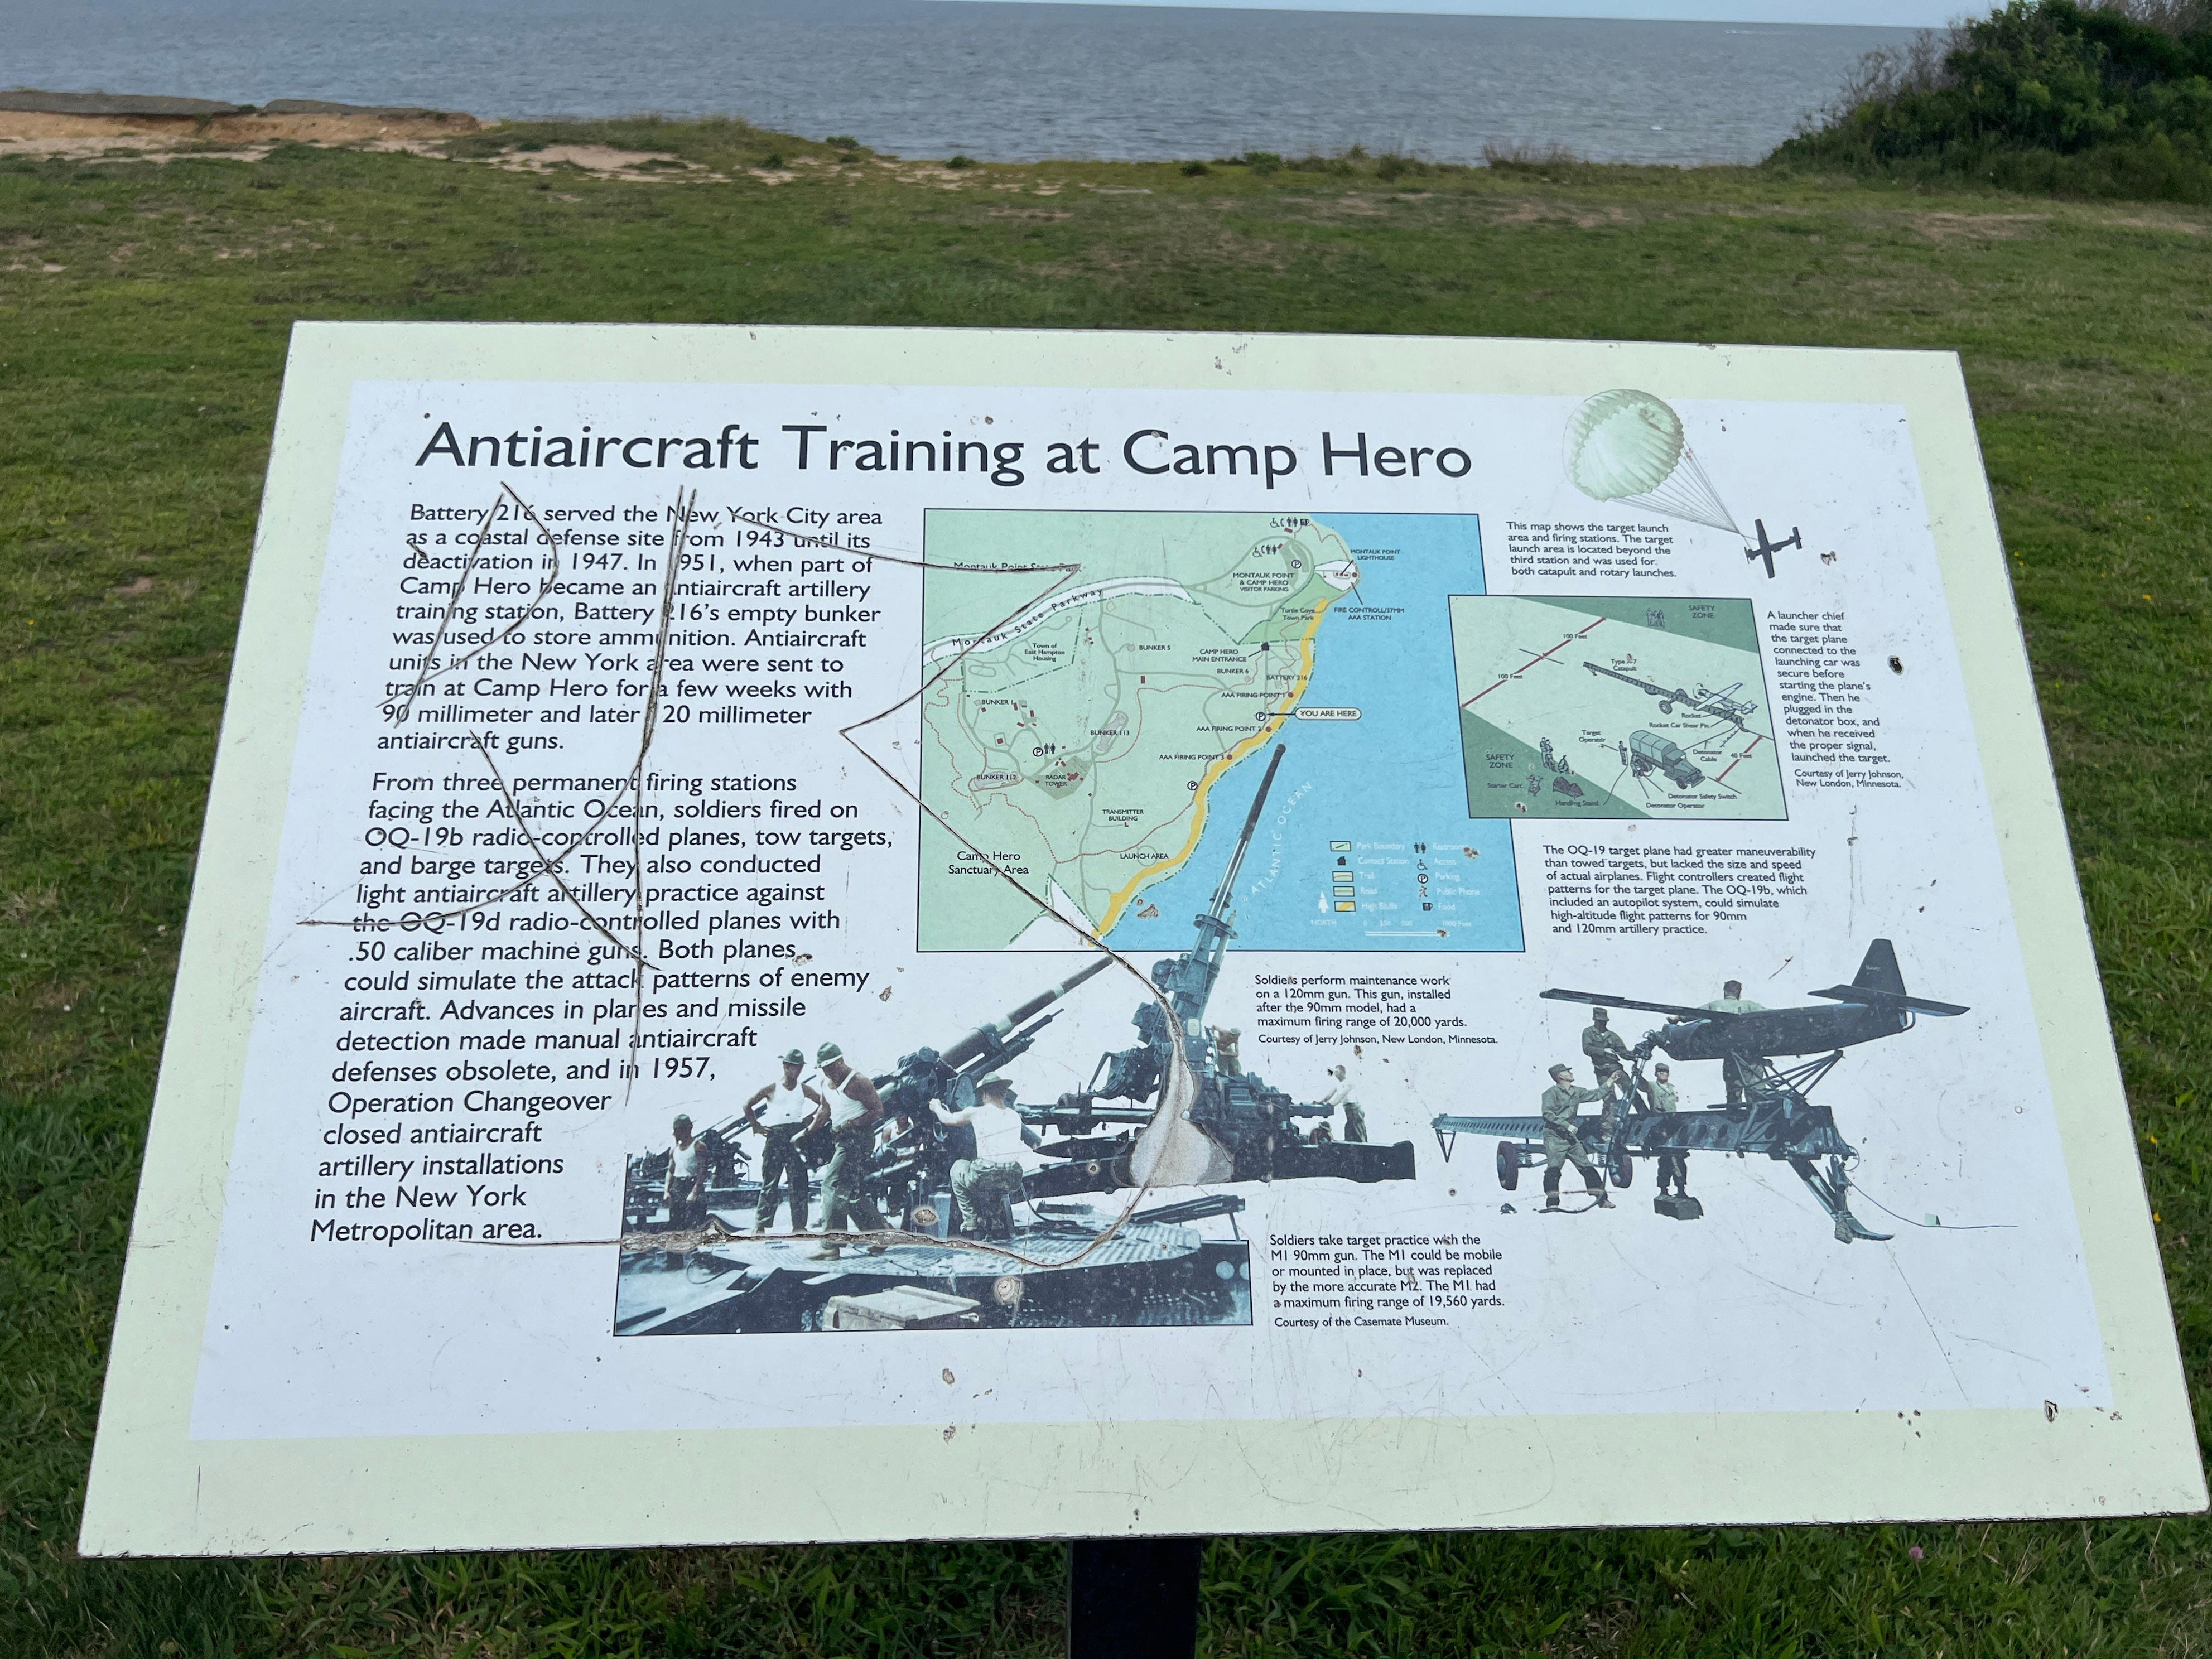 <p>When the Army built the base, it was used to surveil the surrounding area for German submarines, and it was also an antiaircraft artillery training station. At the time, according to the sign, all antiaircraft units in New York were sent to Camp Hero for a few weeks to train.</p><p>It was also home to other surveillance and height-finding radar that "guarded the New York City area against a surprise attack by Soviet bombers or other missiles," the sign said.</p><p>The base was also used "extensively" as a live-fire training range until it was shut down in the '80s.</p>